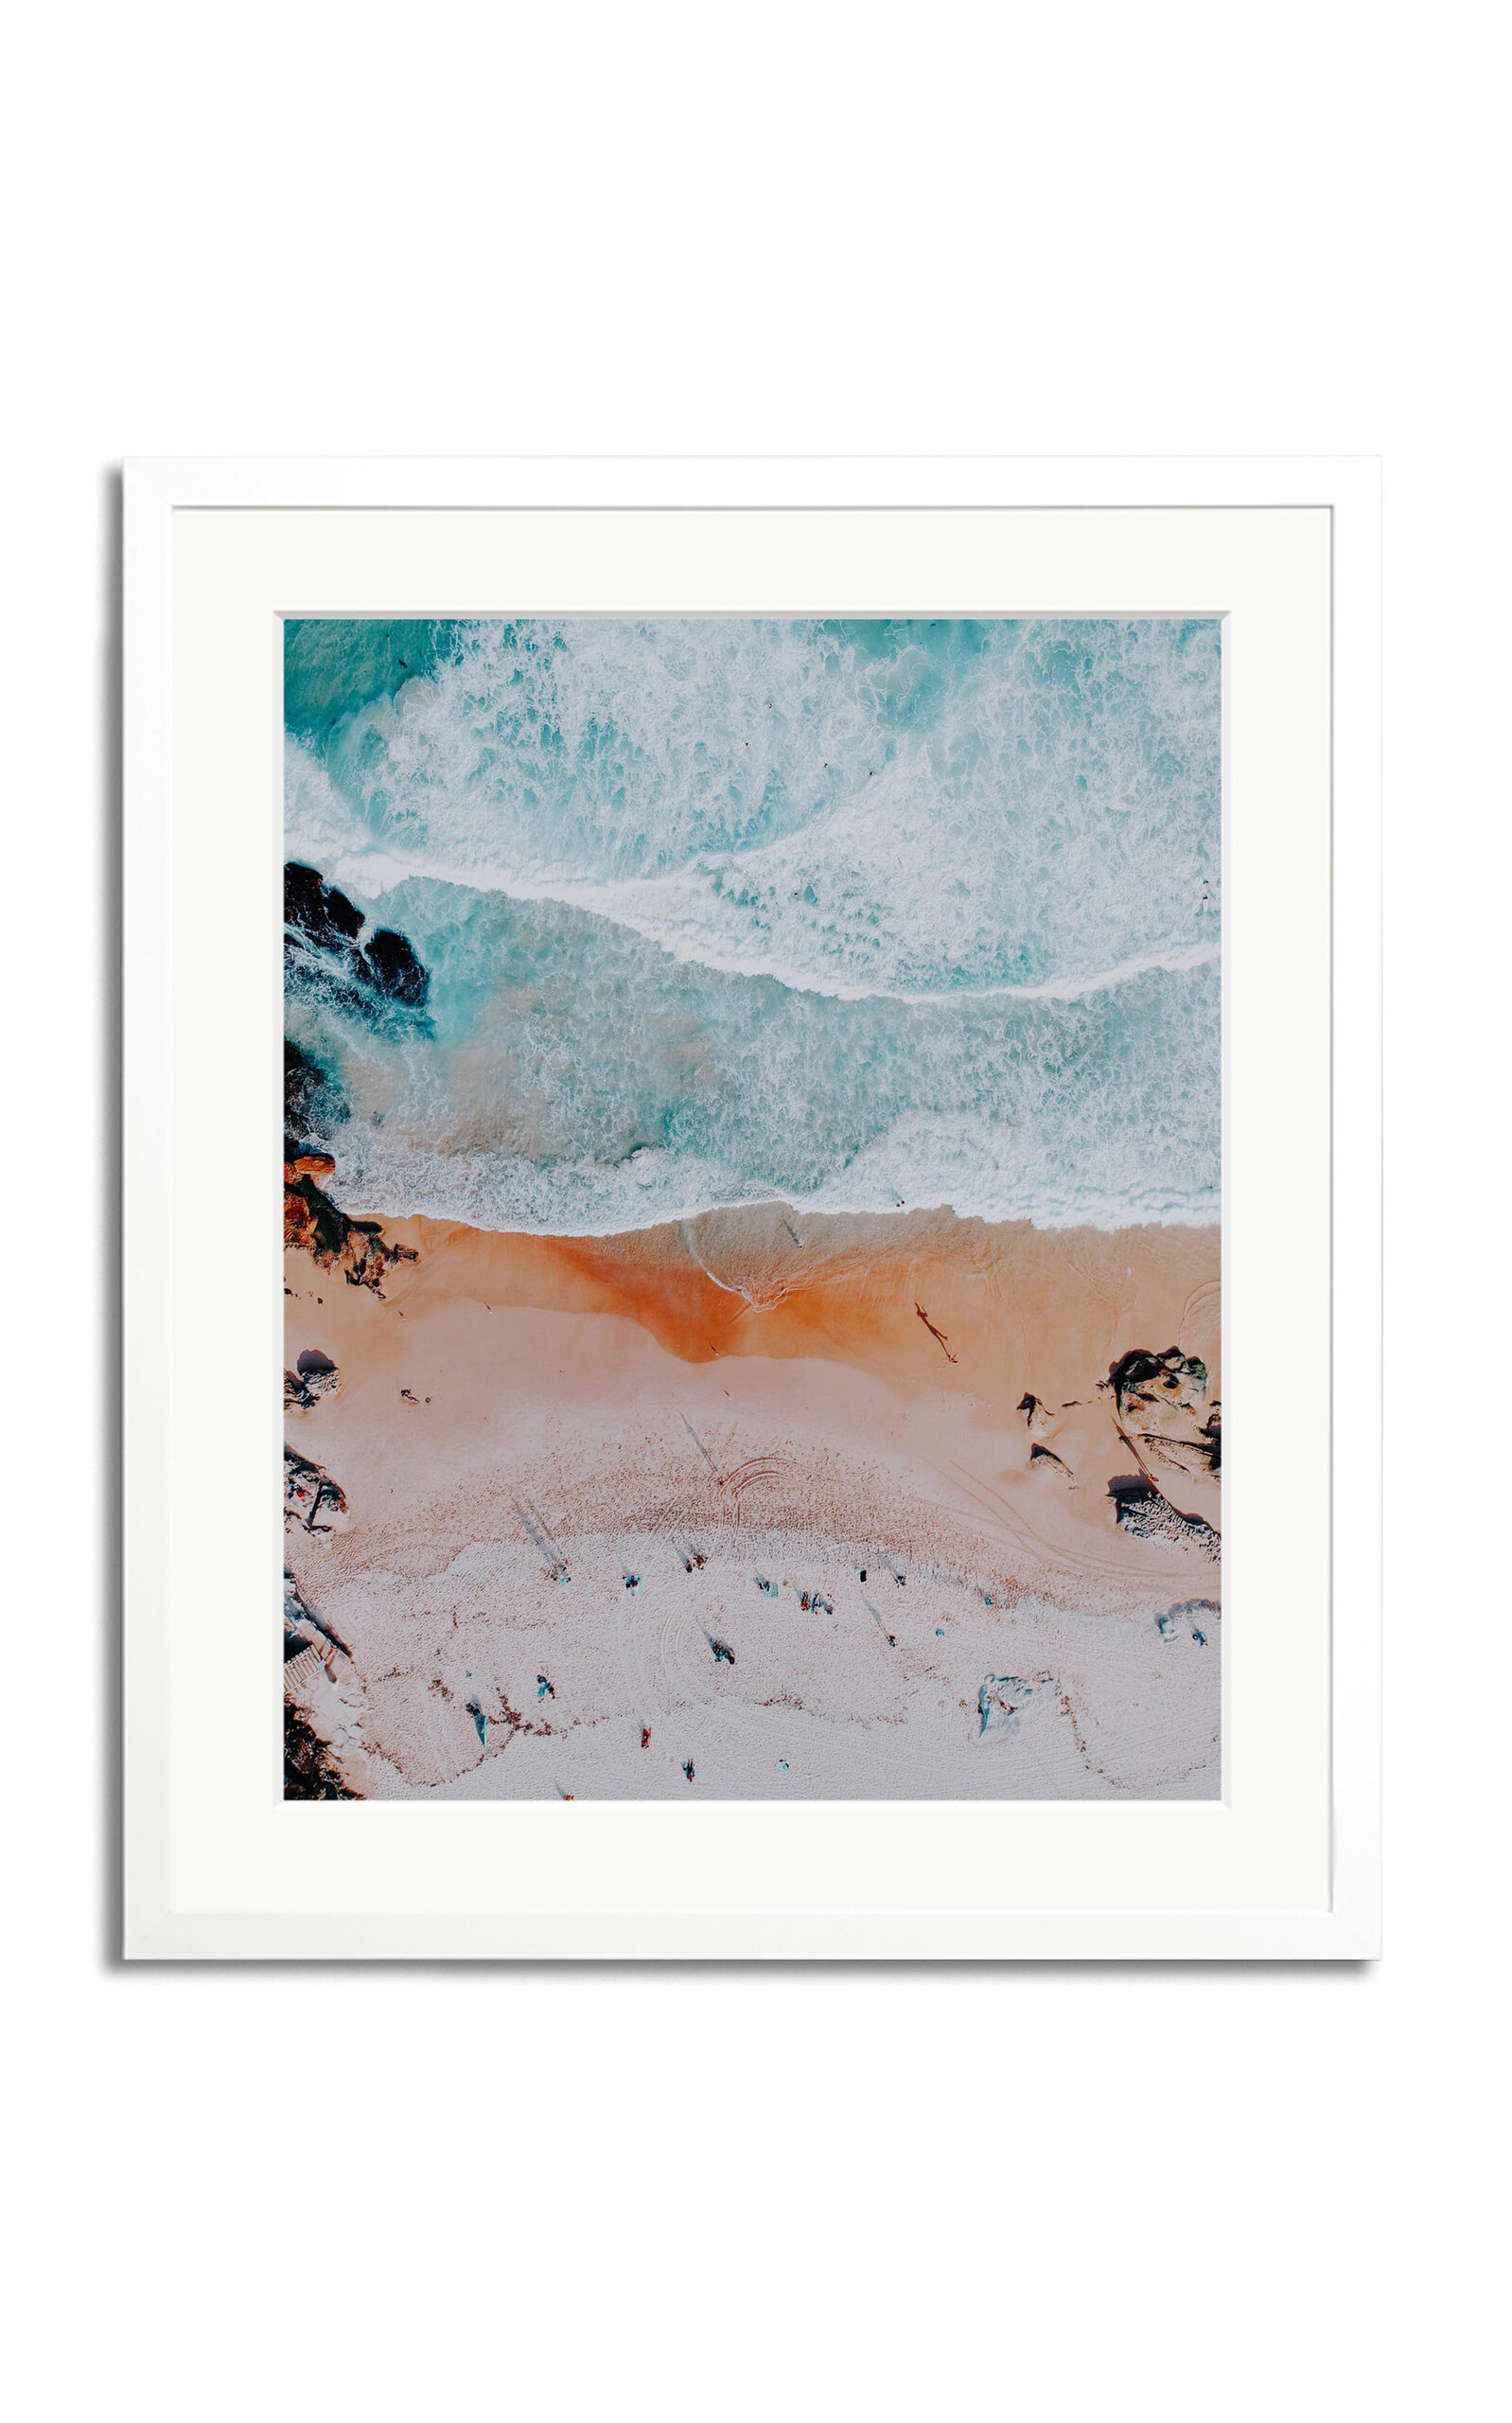 Sonic Editions Maroubra Beach Framed Photography Print In Multi